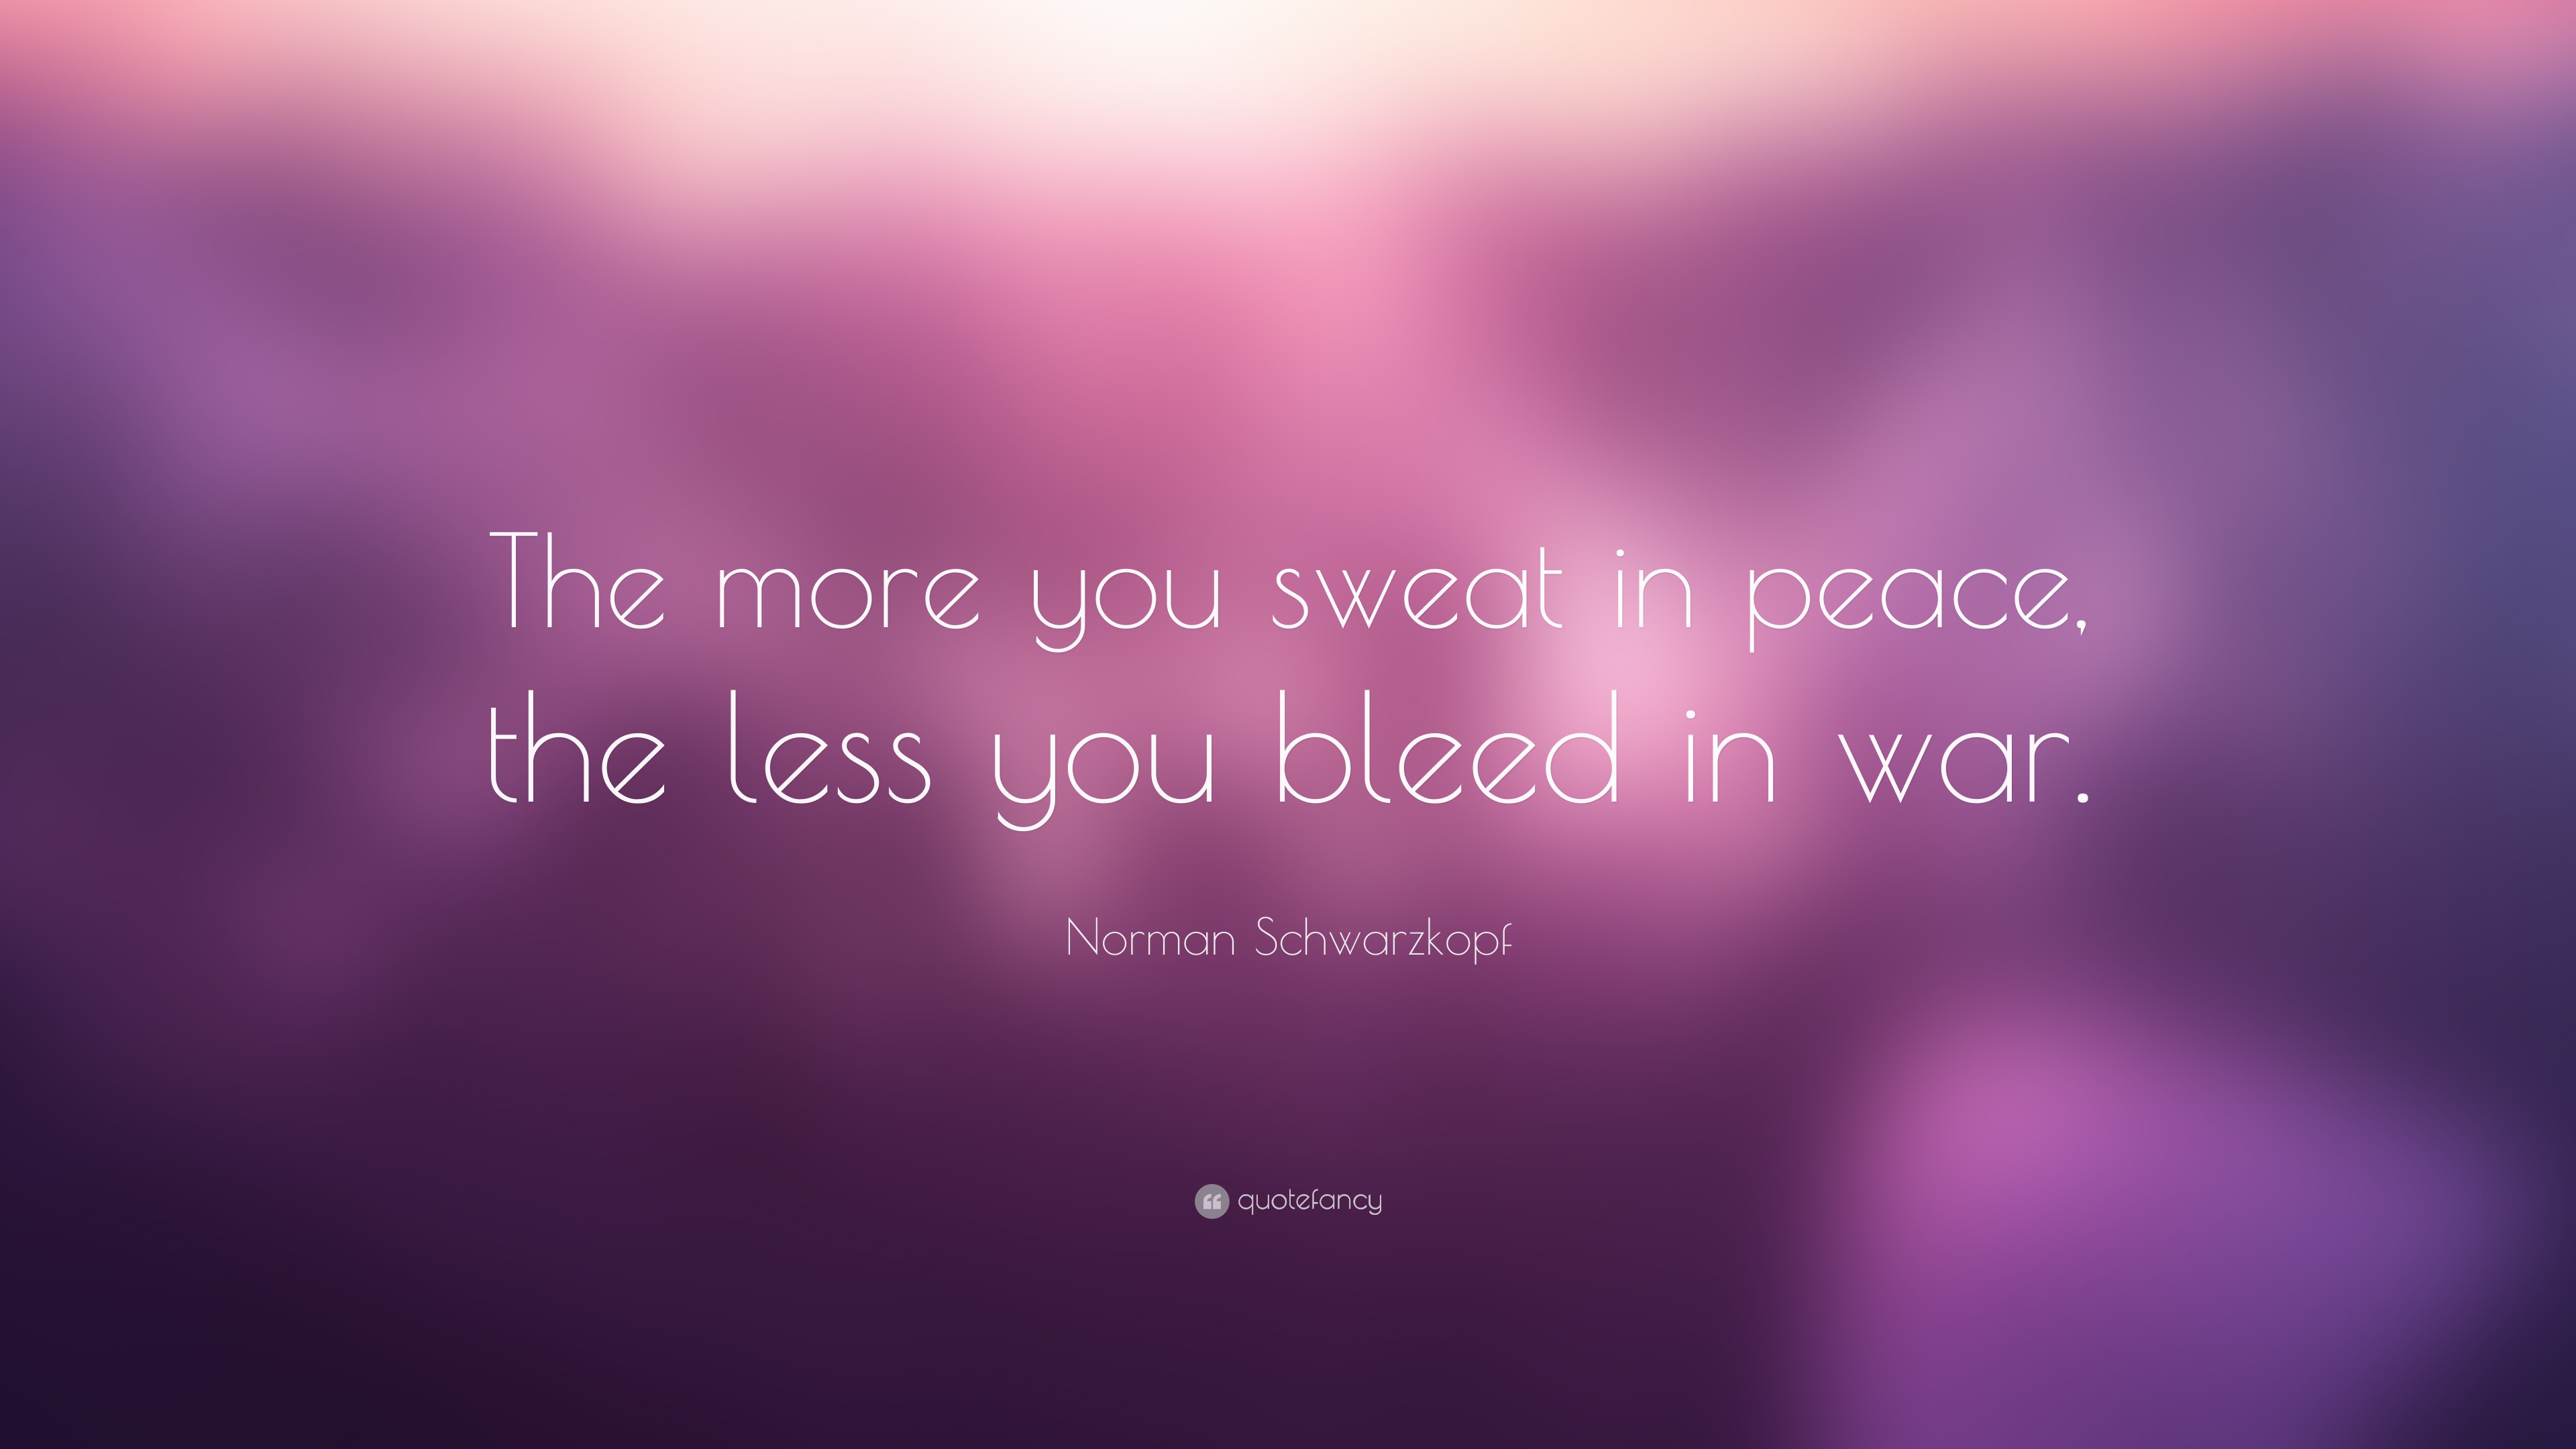 Norman Schwarzkopf Quote: “The more you sweat in peace, the less you